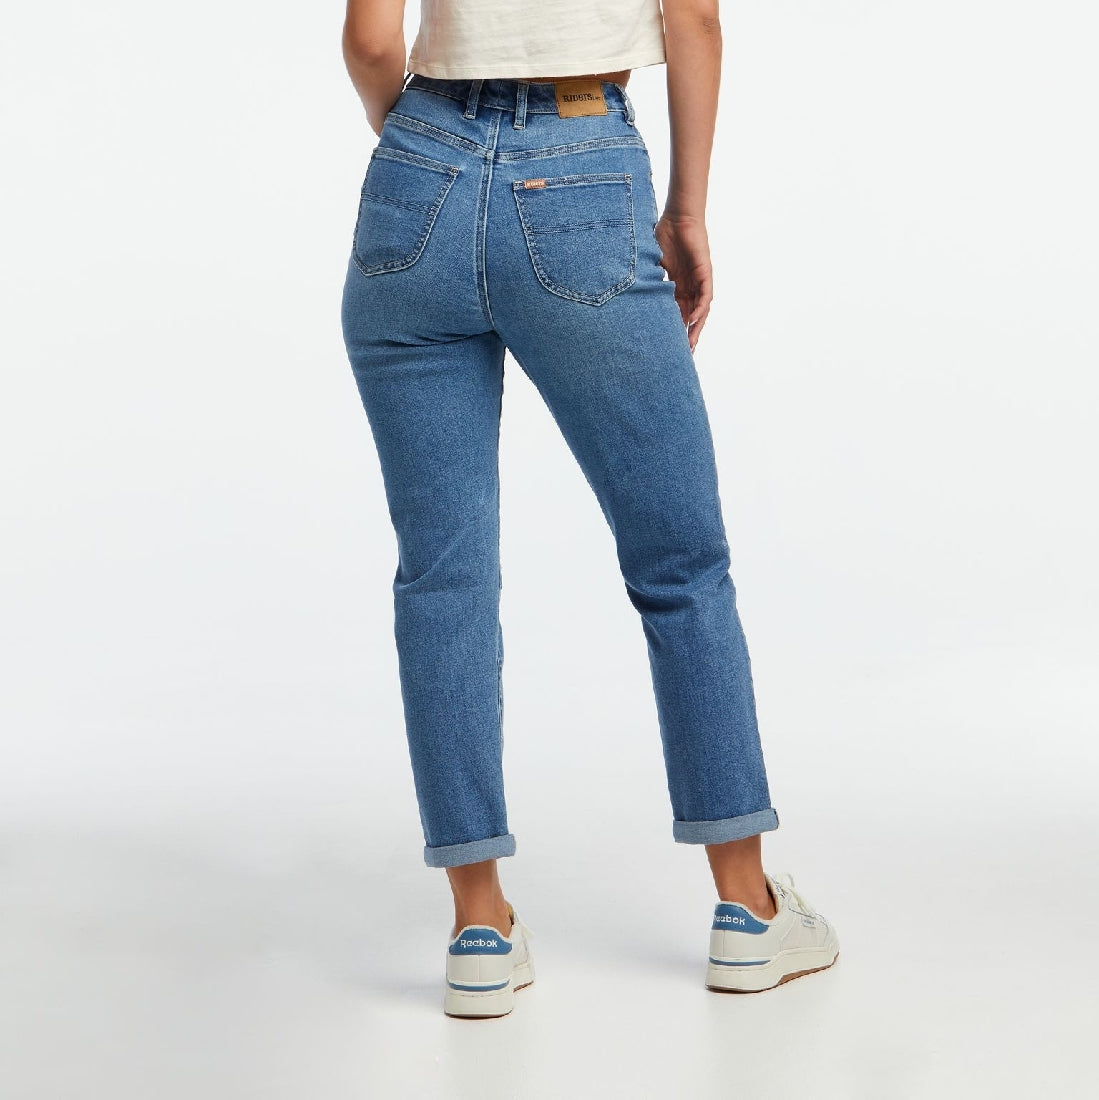 Riders Hi Mom Curve Jean - Little Extras Lifestyle Boutique